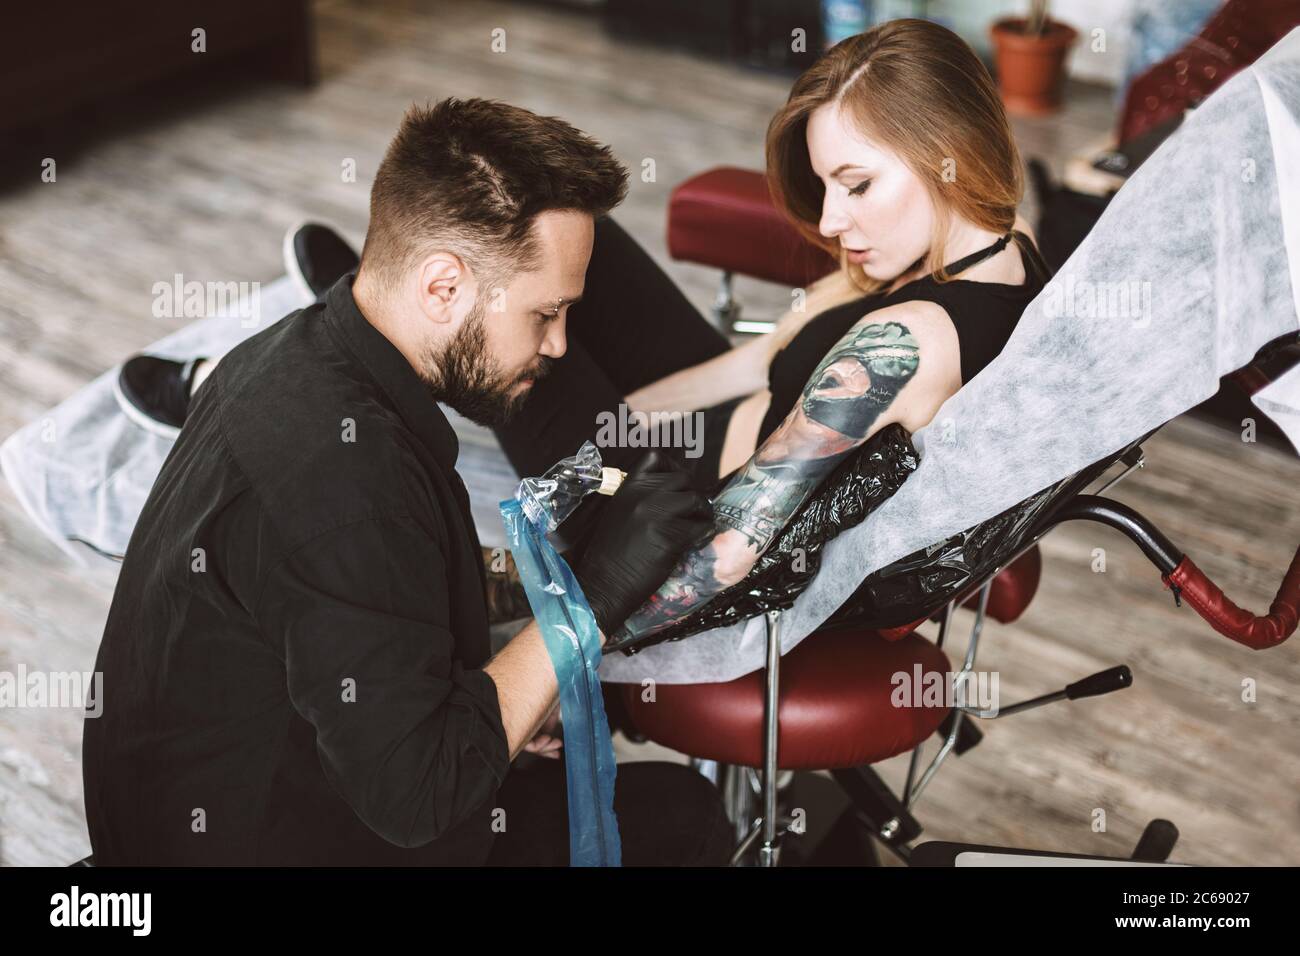 Professional tattooer doing tattoo on hand by tattoo machine while girl thoughtfully watching process in studio Stock Photo